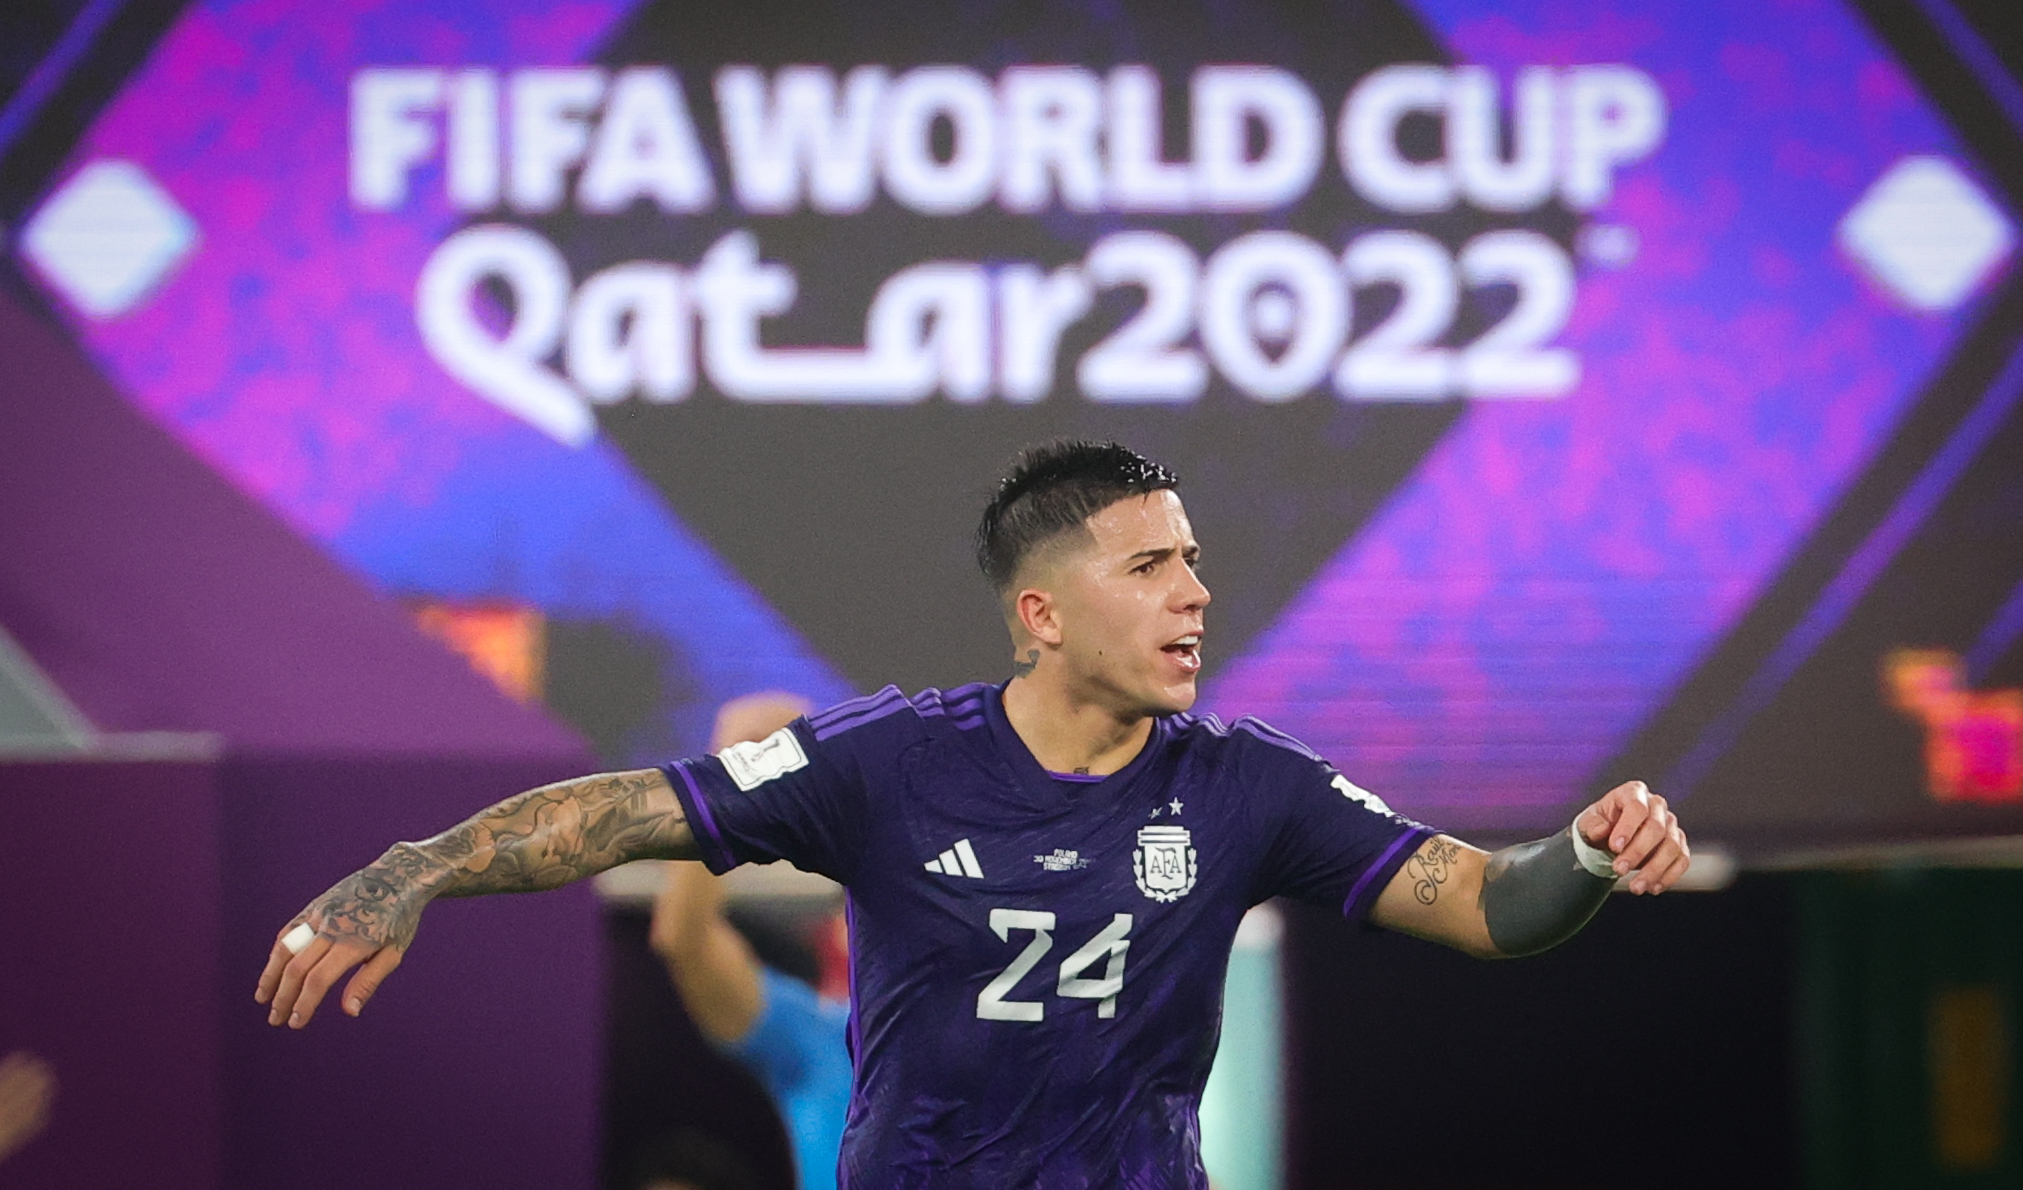 Argentina's Enzo Fernandez gestures during a soccer game between Poland and Argentina, the third and last game in Group C of the FIFA 2022 World Cup in Al Wakrah, State of Qatar on Wednesday 30 November 2022. BELGA PHOTO VIRGINIE LEFOUR Photo: VIRGINIE LEFOUR/PIXSELL